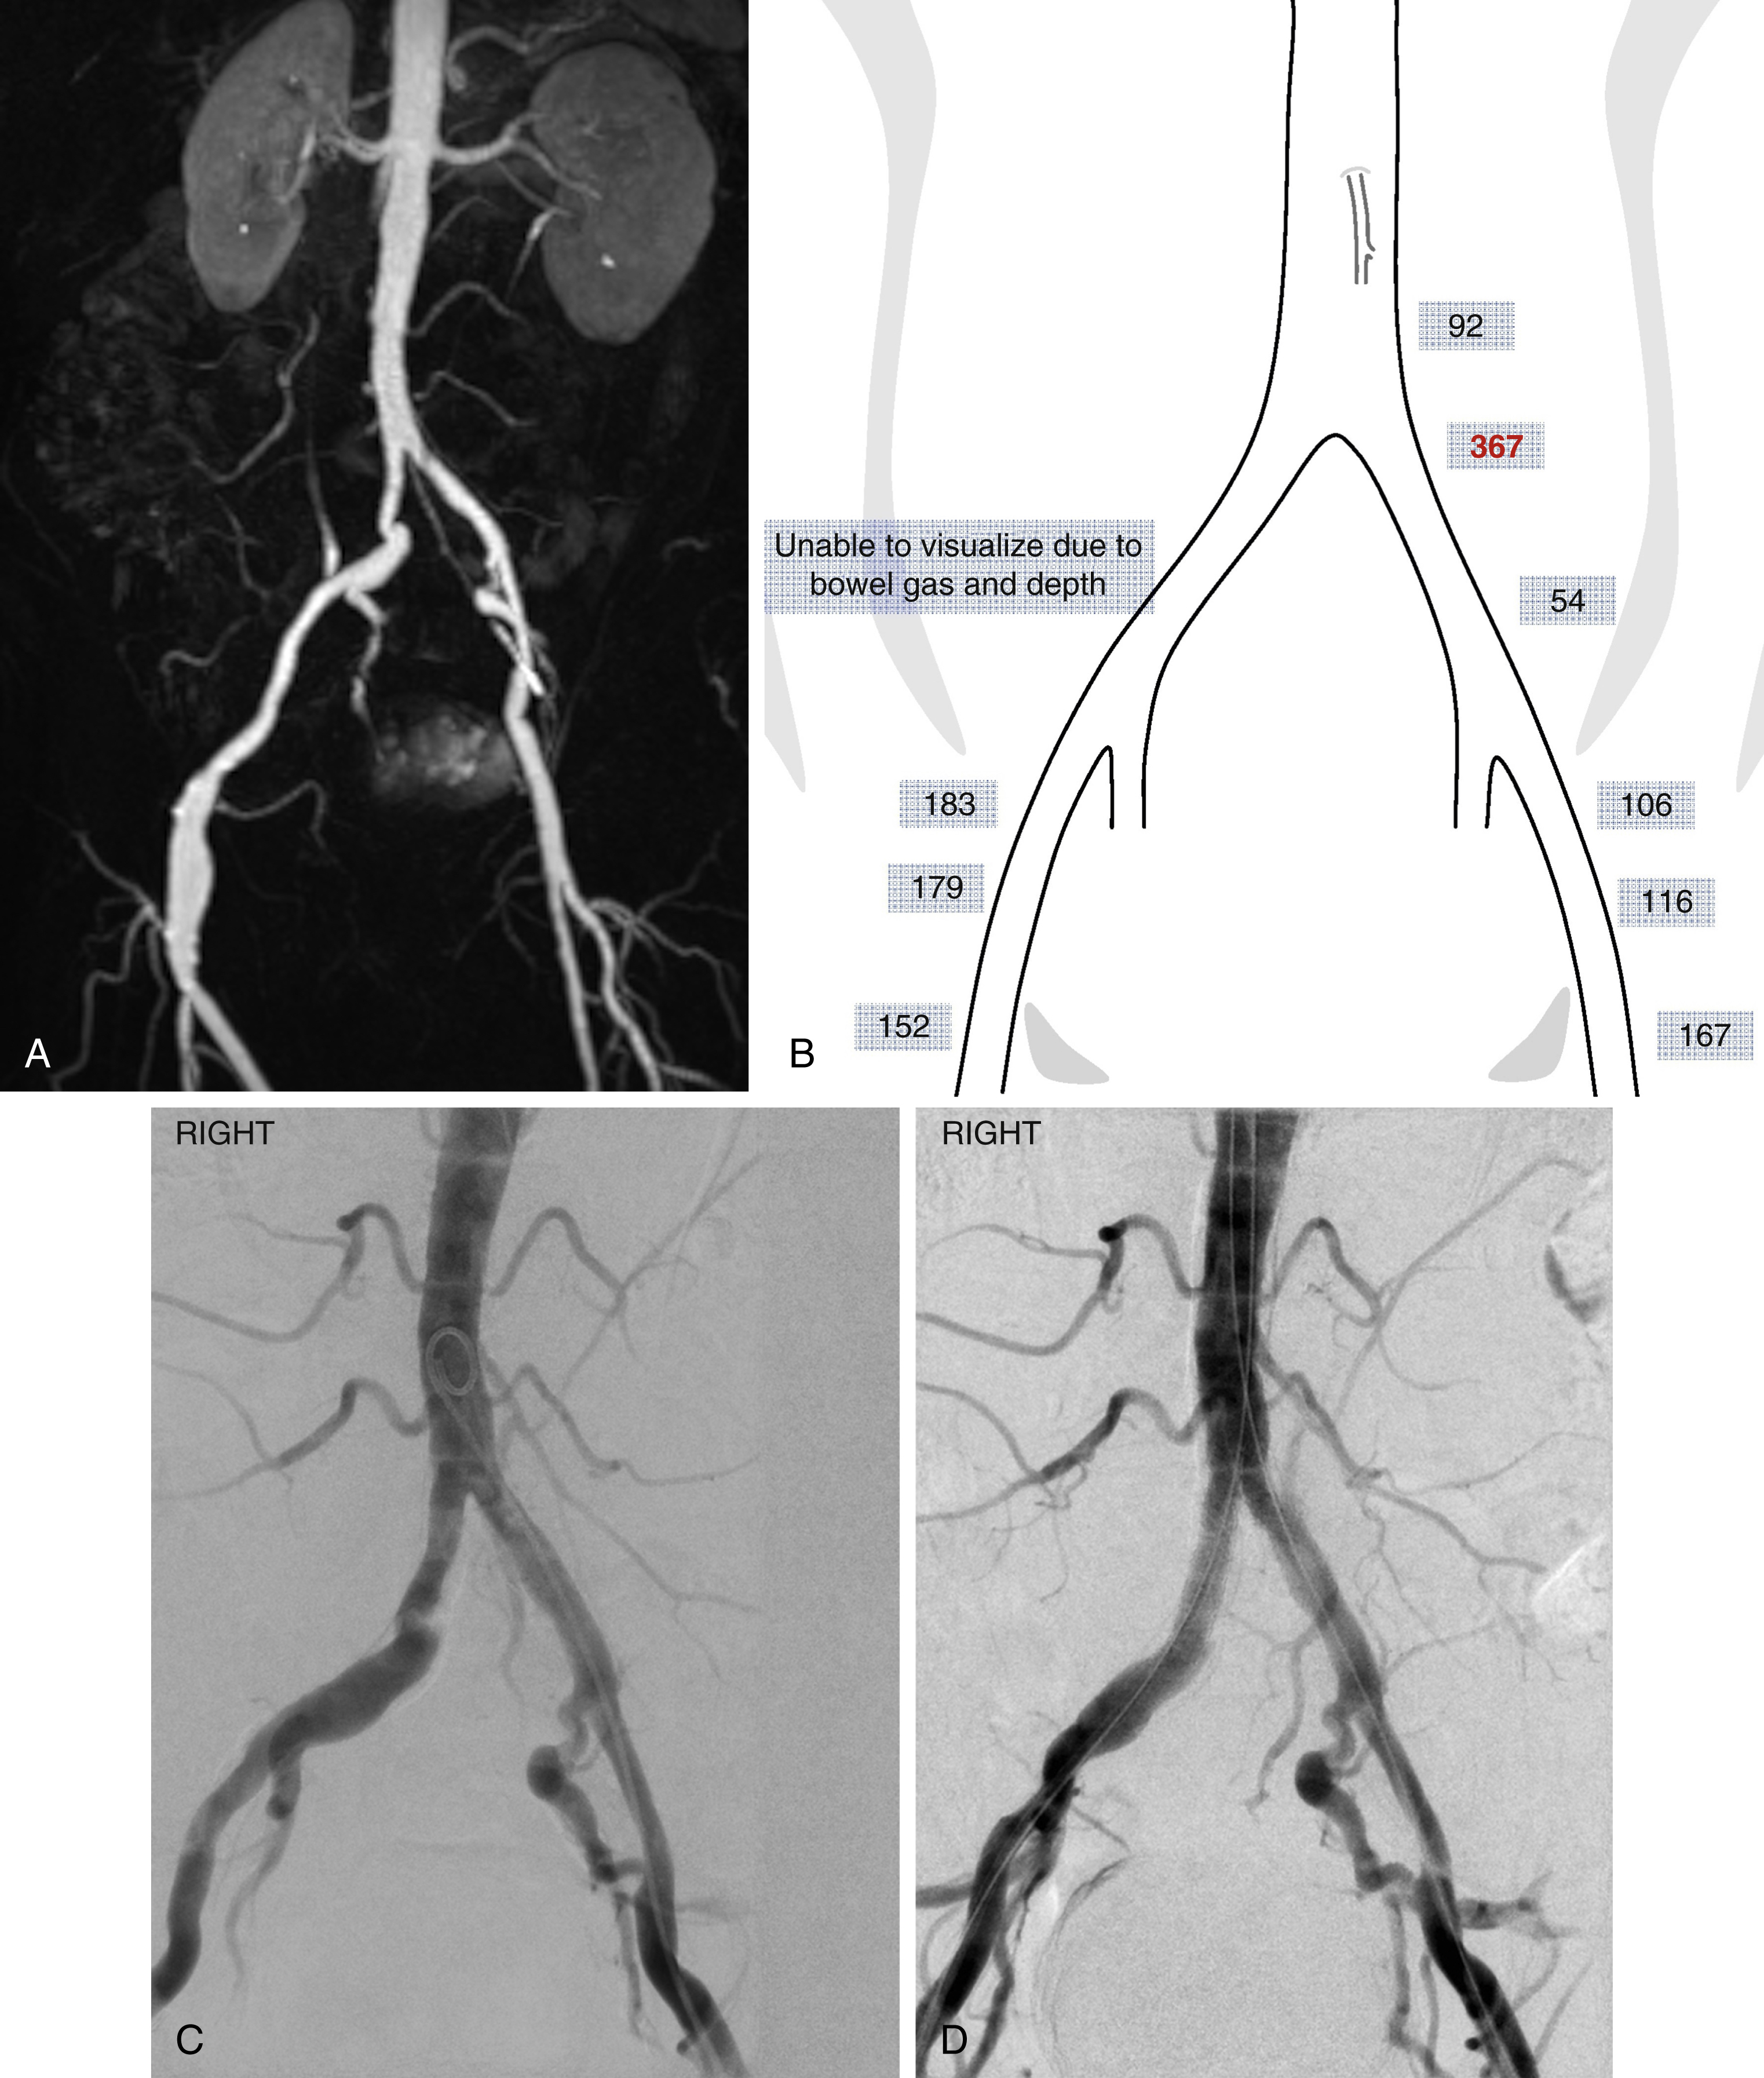 Fig. 13.2, Use of Doppler US to ascertain significance of borderline left common iliac artery stenosis identified on MR. (A) MRA demonstrating web-like stenosis in the left common iliac artery, of unclear significance. (B) Doppler US demonstrates turbulent, high-velocity flow (doubling of velocities in keeping with a moderate stenosis) at this point in the L CIA. (C) Angiogram demonstrating subtle L CIA stenosis. (D) Angiography following stenting of the lesion with a self-expanding bare metal stent demonstrates improved luminal caliber.